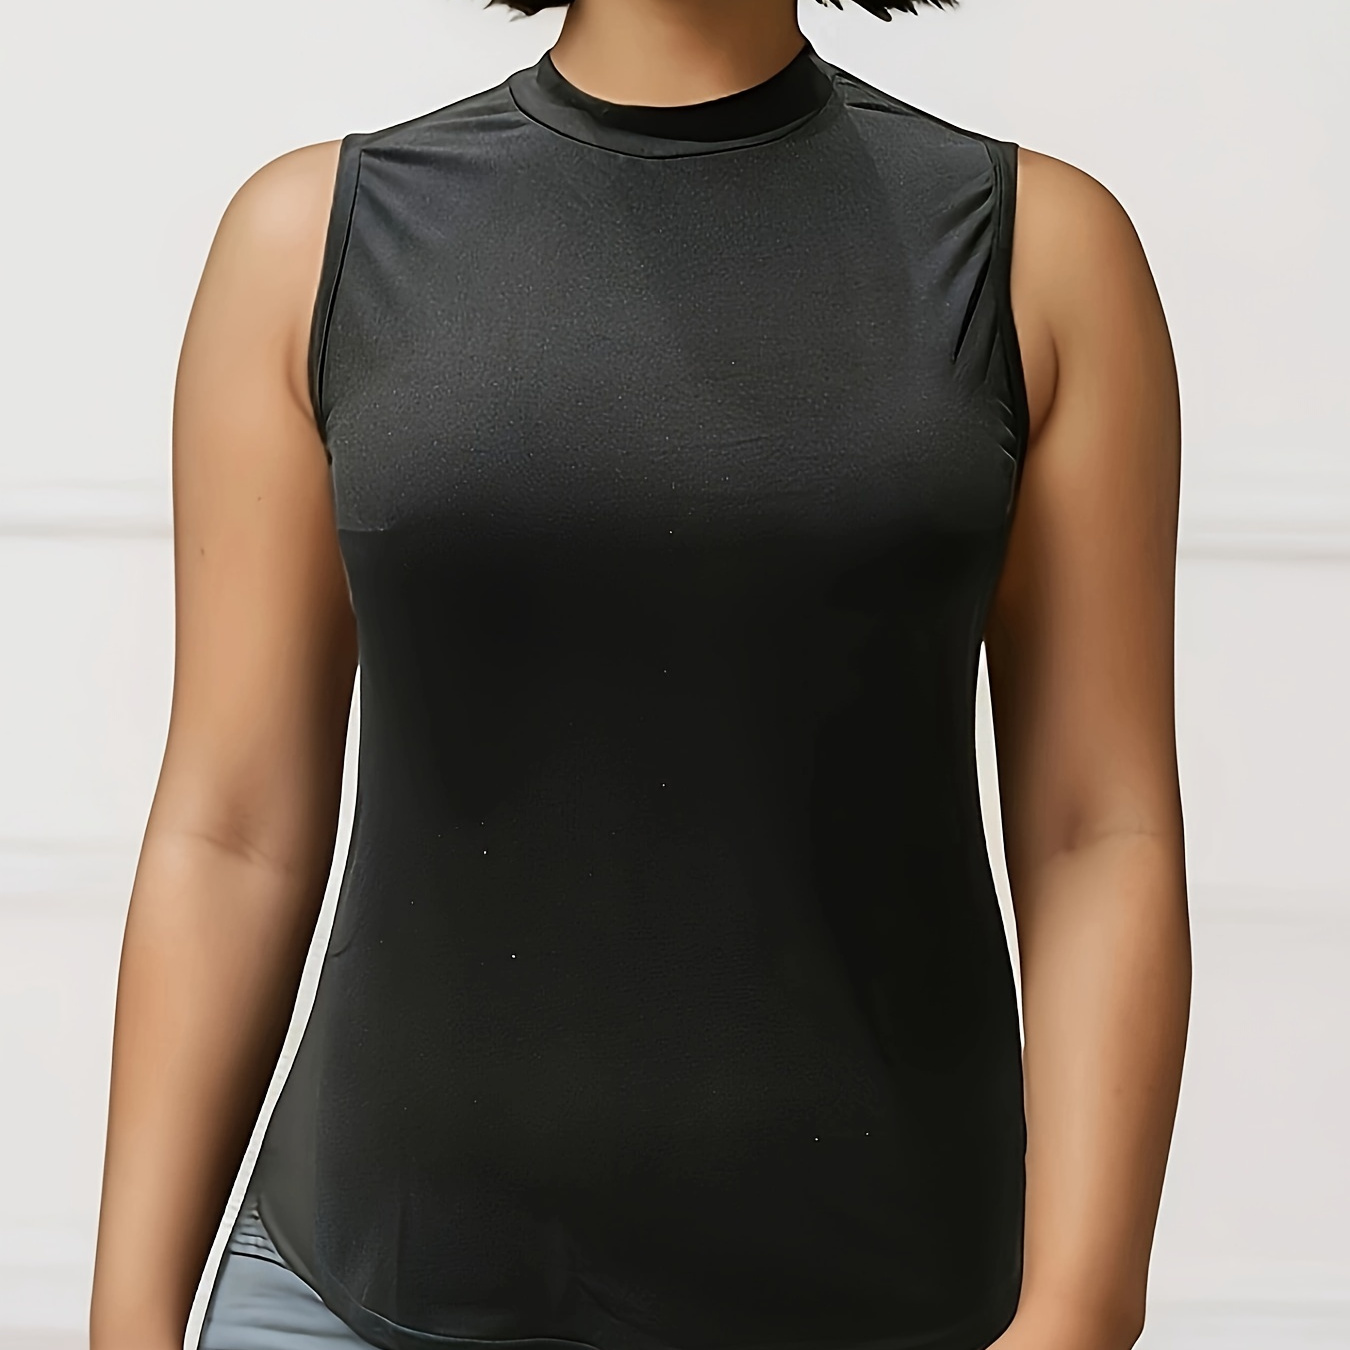 

Plus Size Slid Simple Tank Top, Casual Crew Neck Sleeveless Top For Summer, Women's Plus Size Clothing